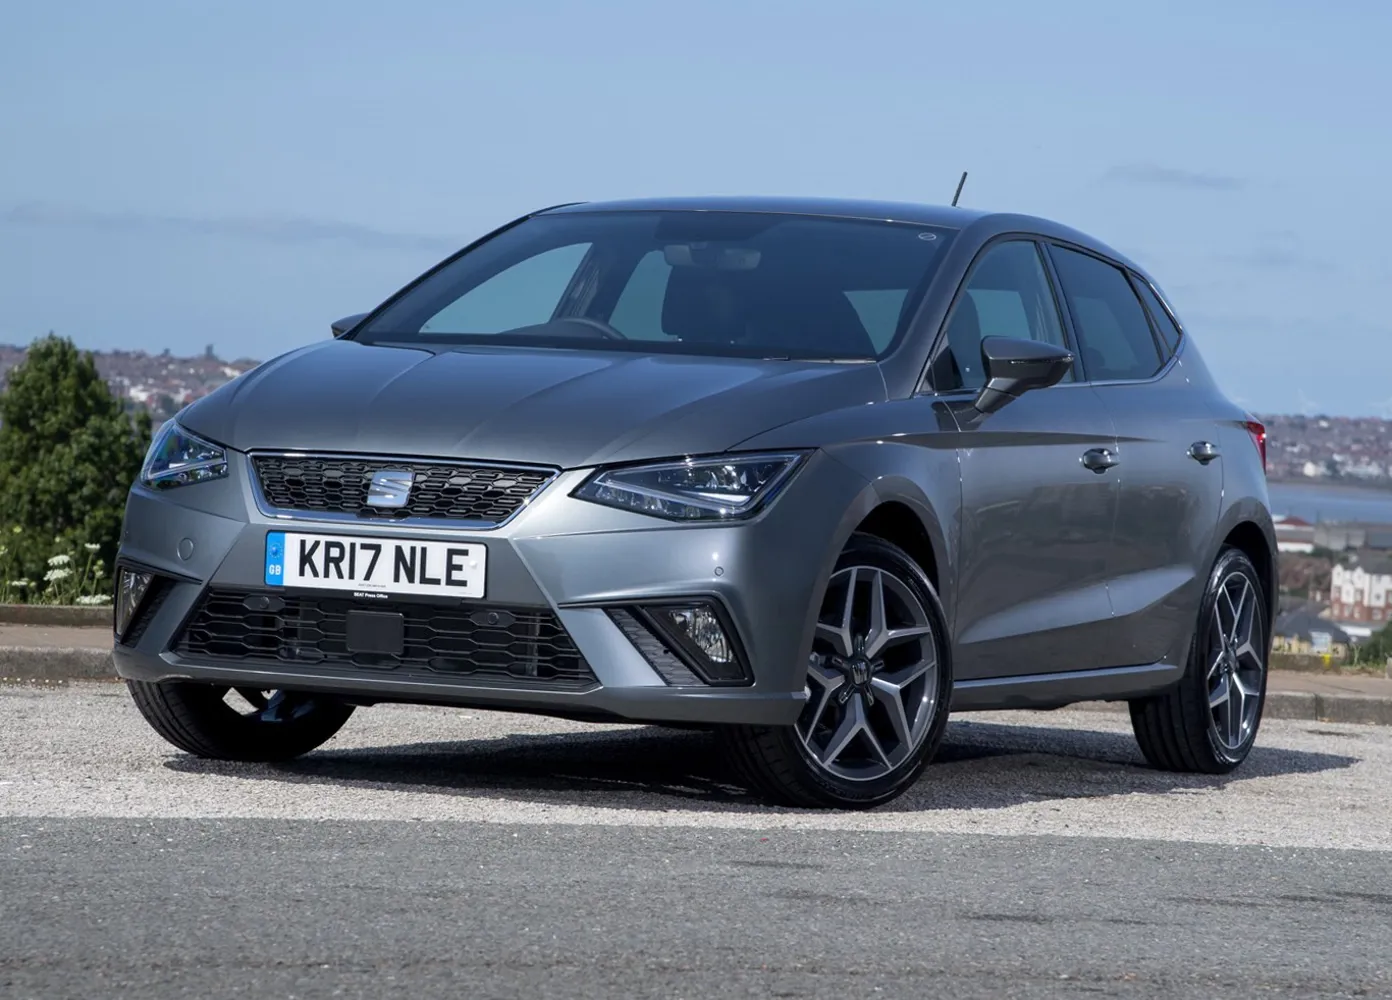 Seat Ibiza diesel is very frugal but doesn't have the edge over